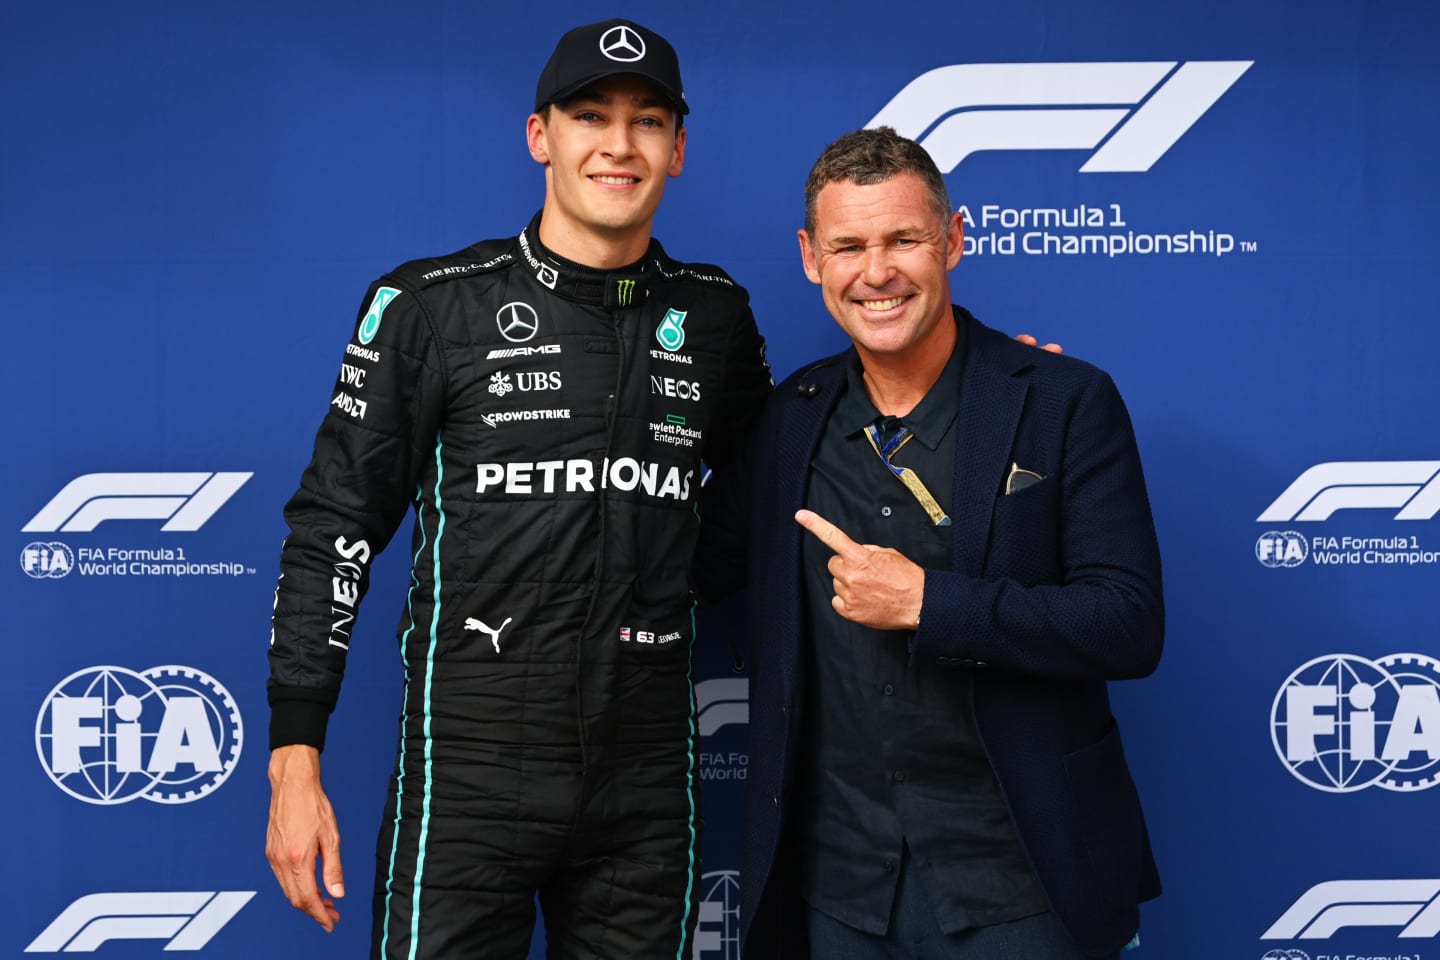 BUDAPEST, HUNGARY - JULY 30: Pole position qualifier George Russell of Great Britain and Mercedes is presented with the Pirelli Pole Position trophy by Tom Kristensen during qualifying ahead of the F1 Grand Prix of Hungary at Hungaroring on July 30, 2022 in Budapest, Hungary. (Photo by Dan Mullan/Getty Images)